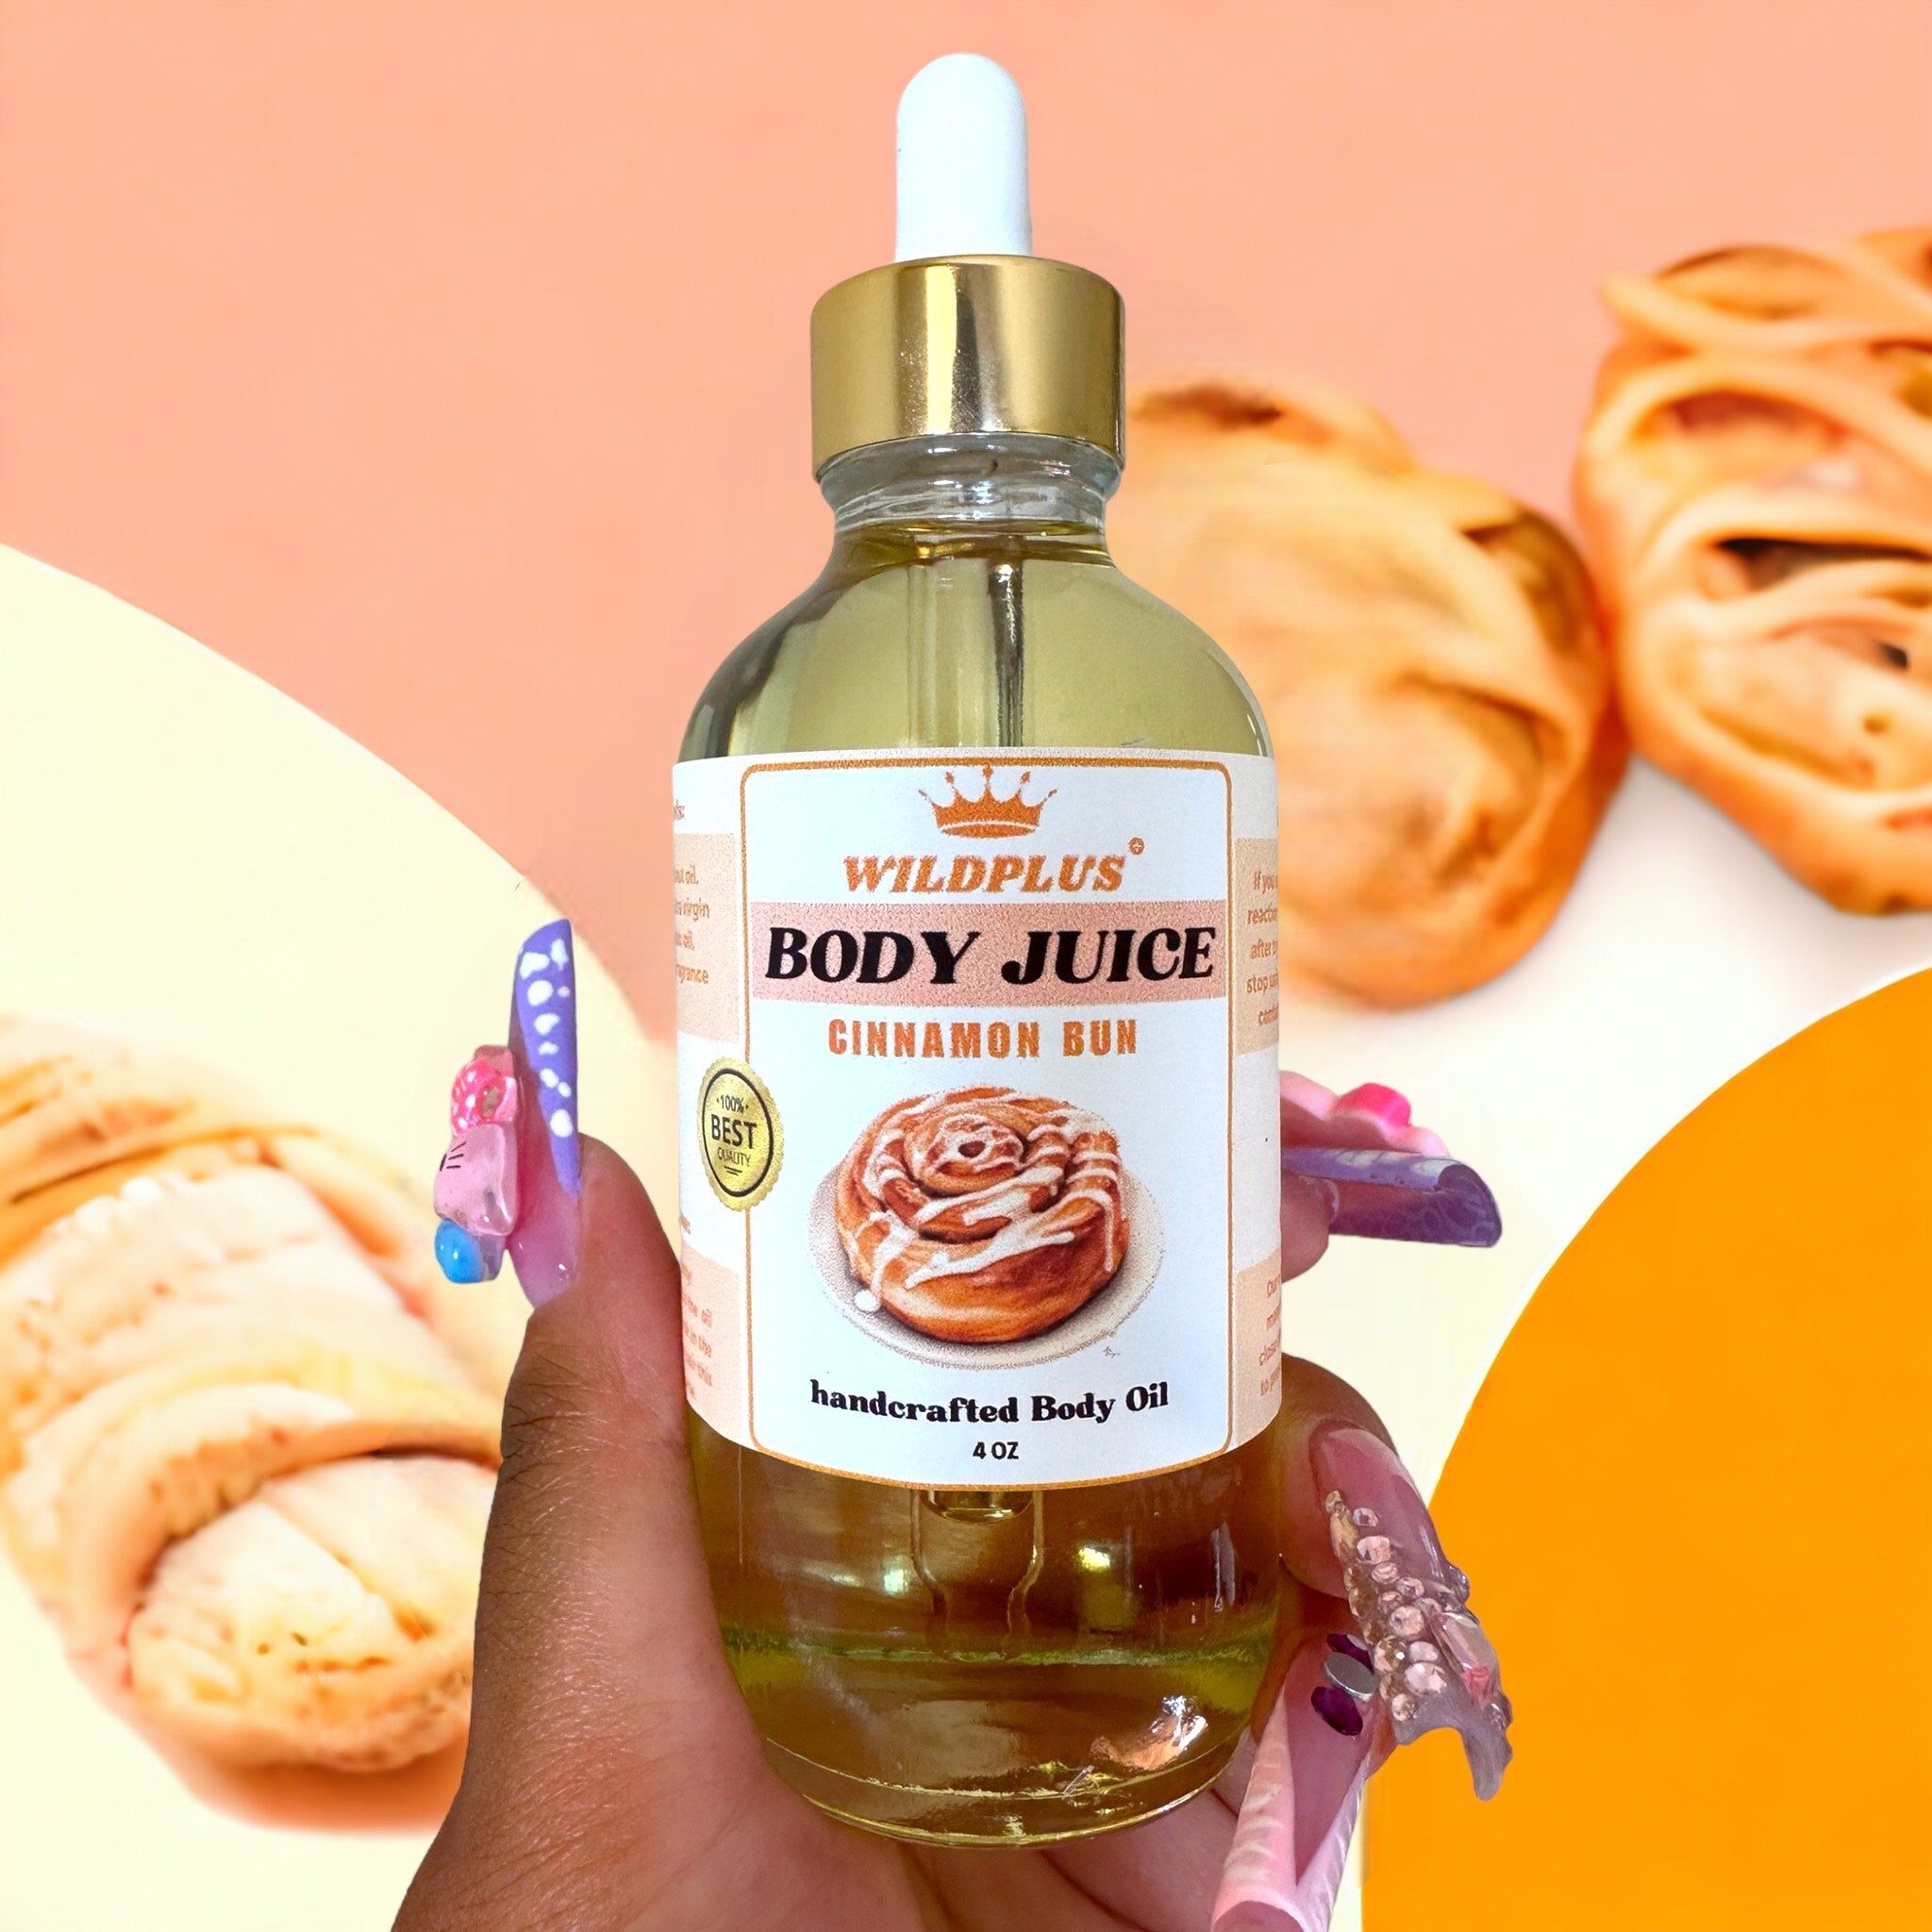 Cold Pressed Skin Body Juice Superfood Body Oil